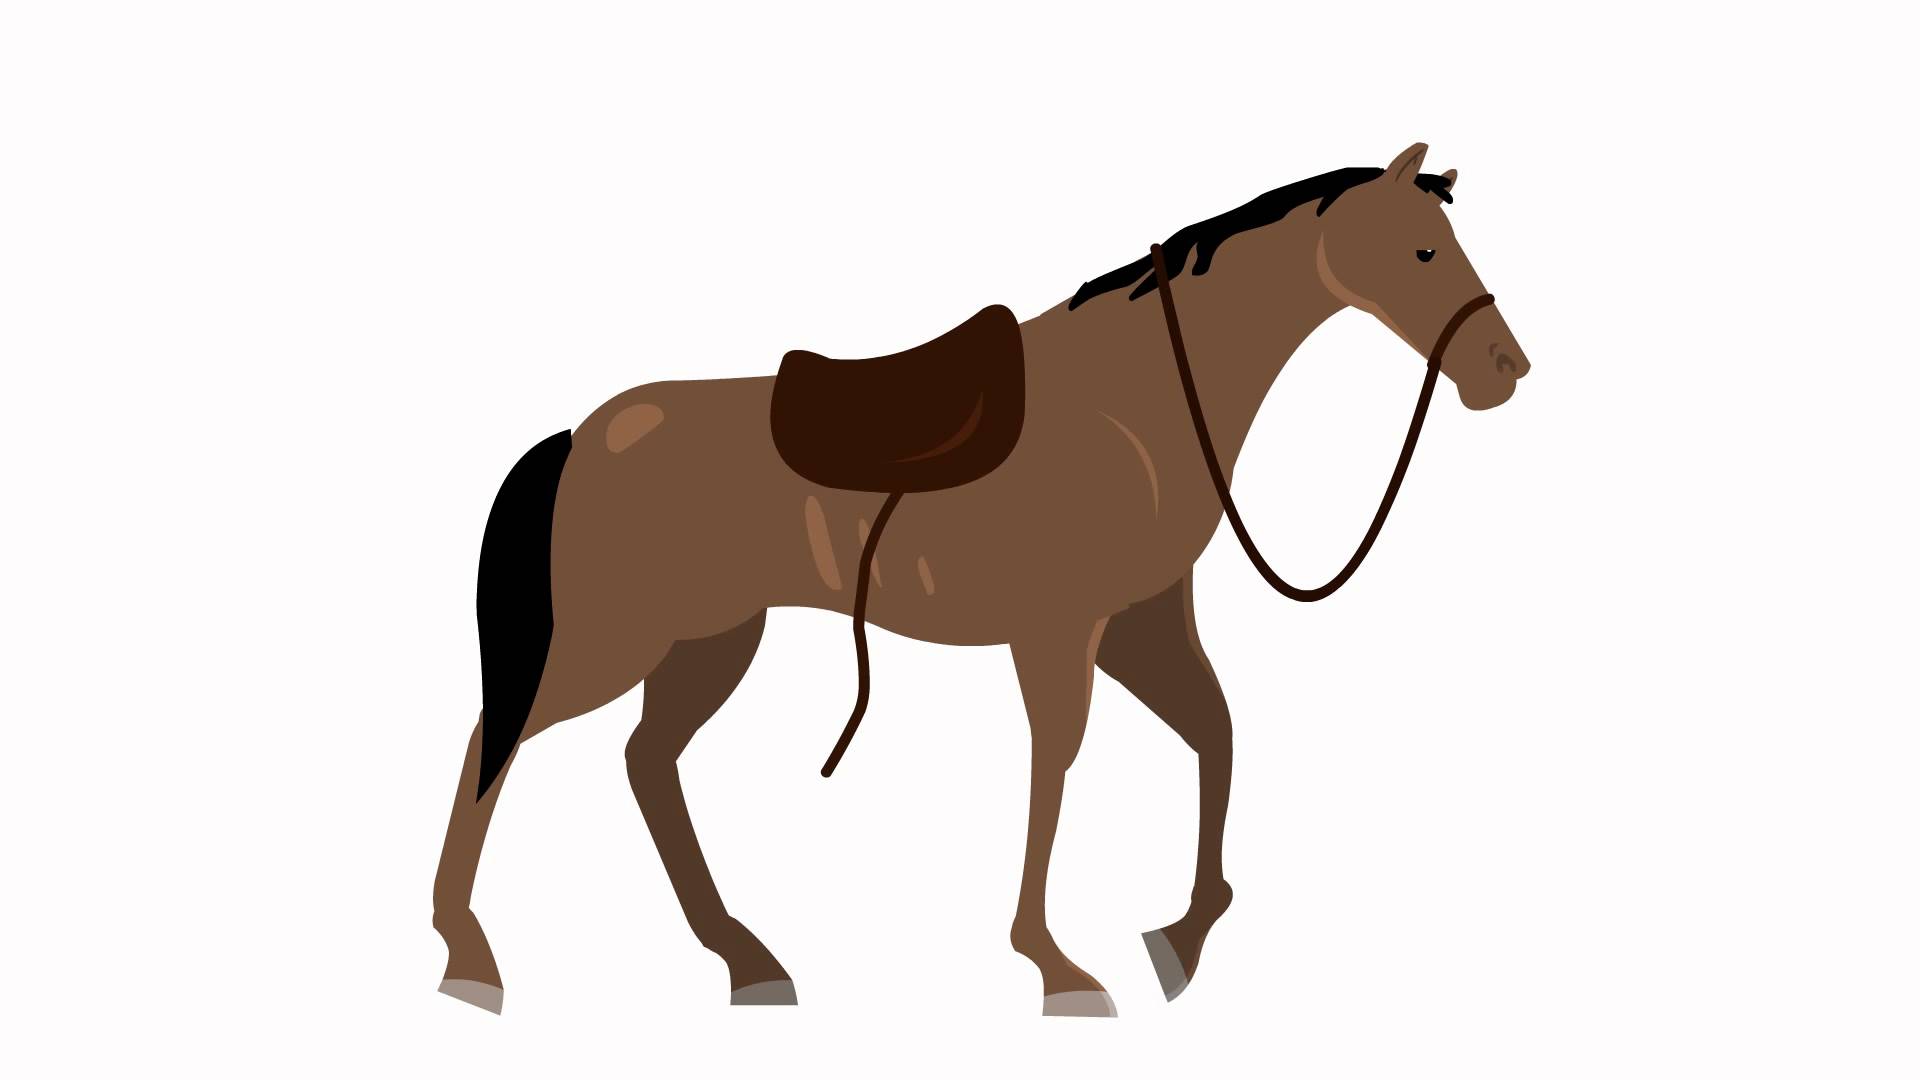 Free Animated Horse, Download Free Clip Art, Free Clip Art.